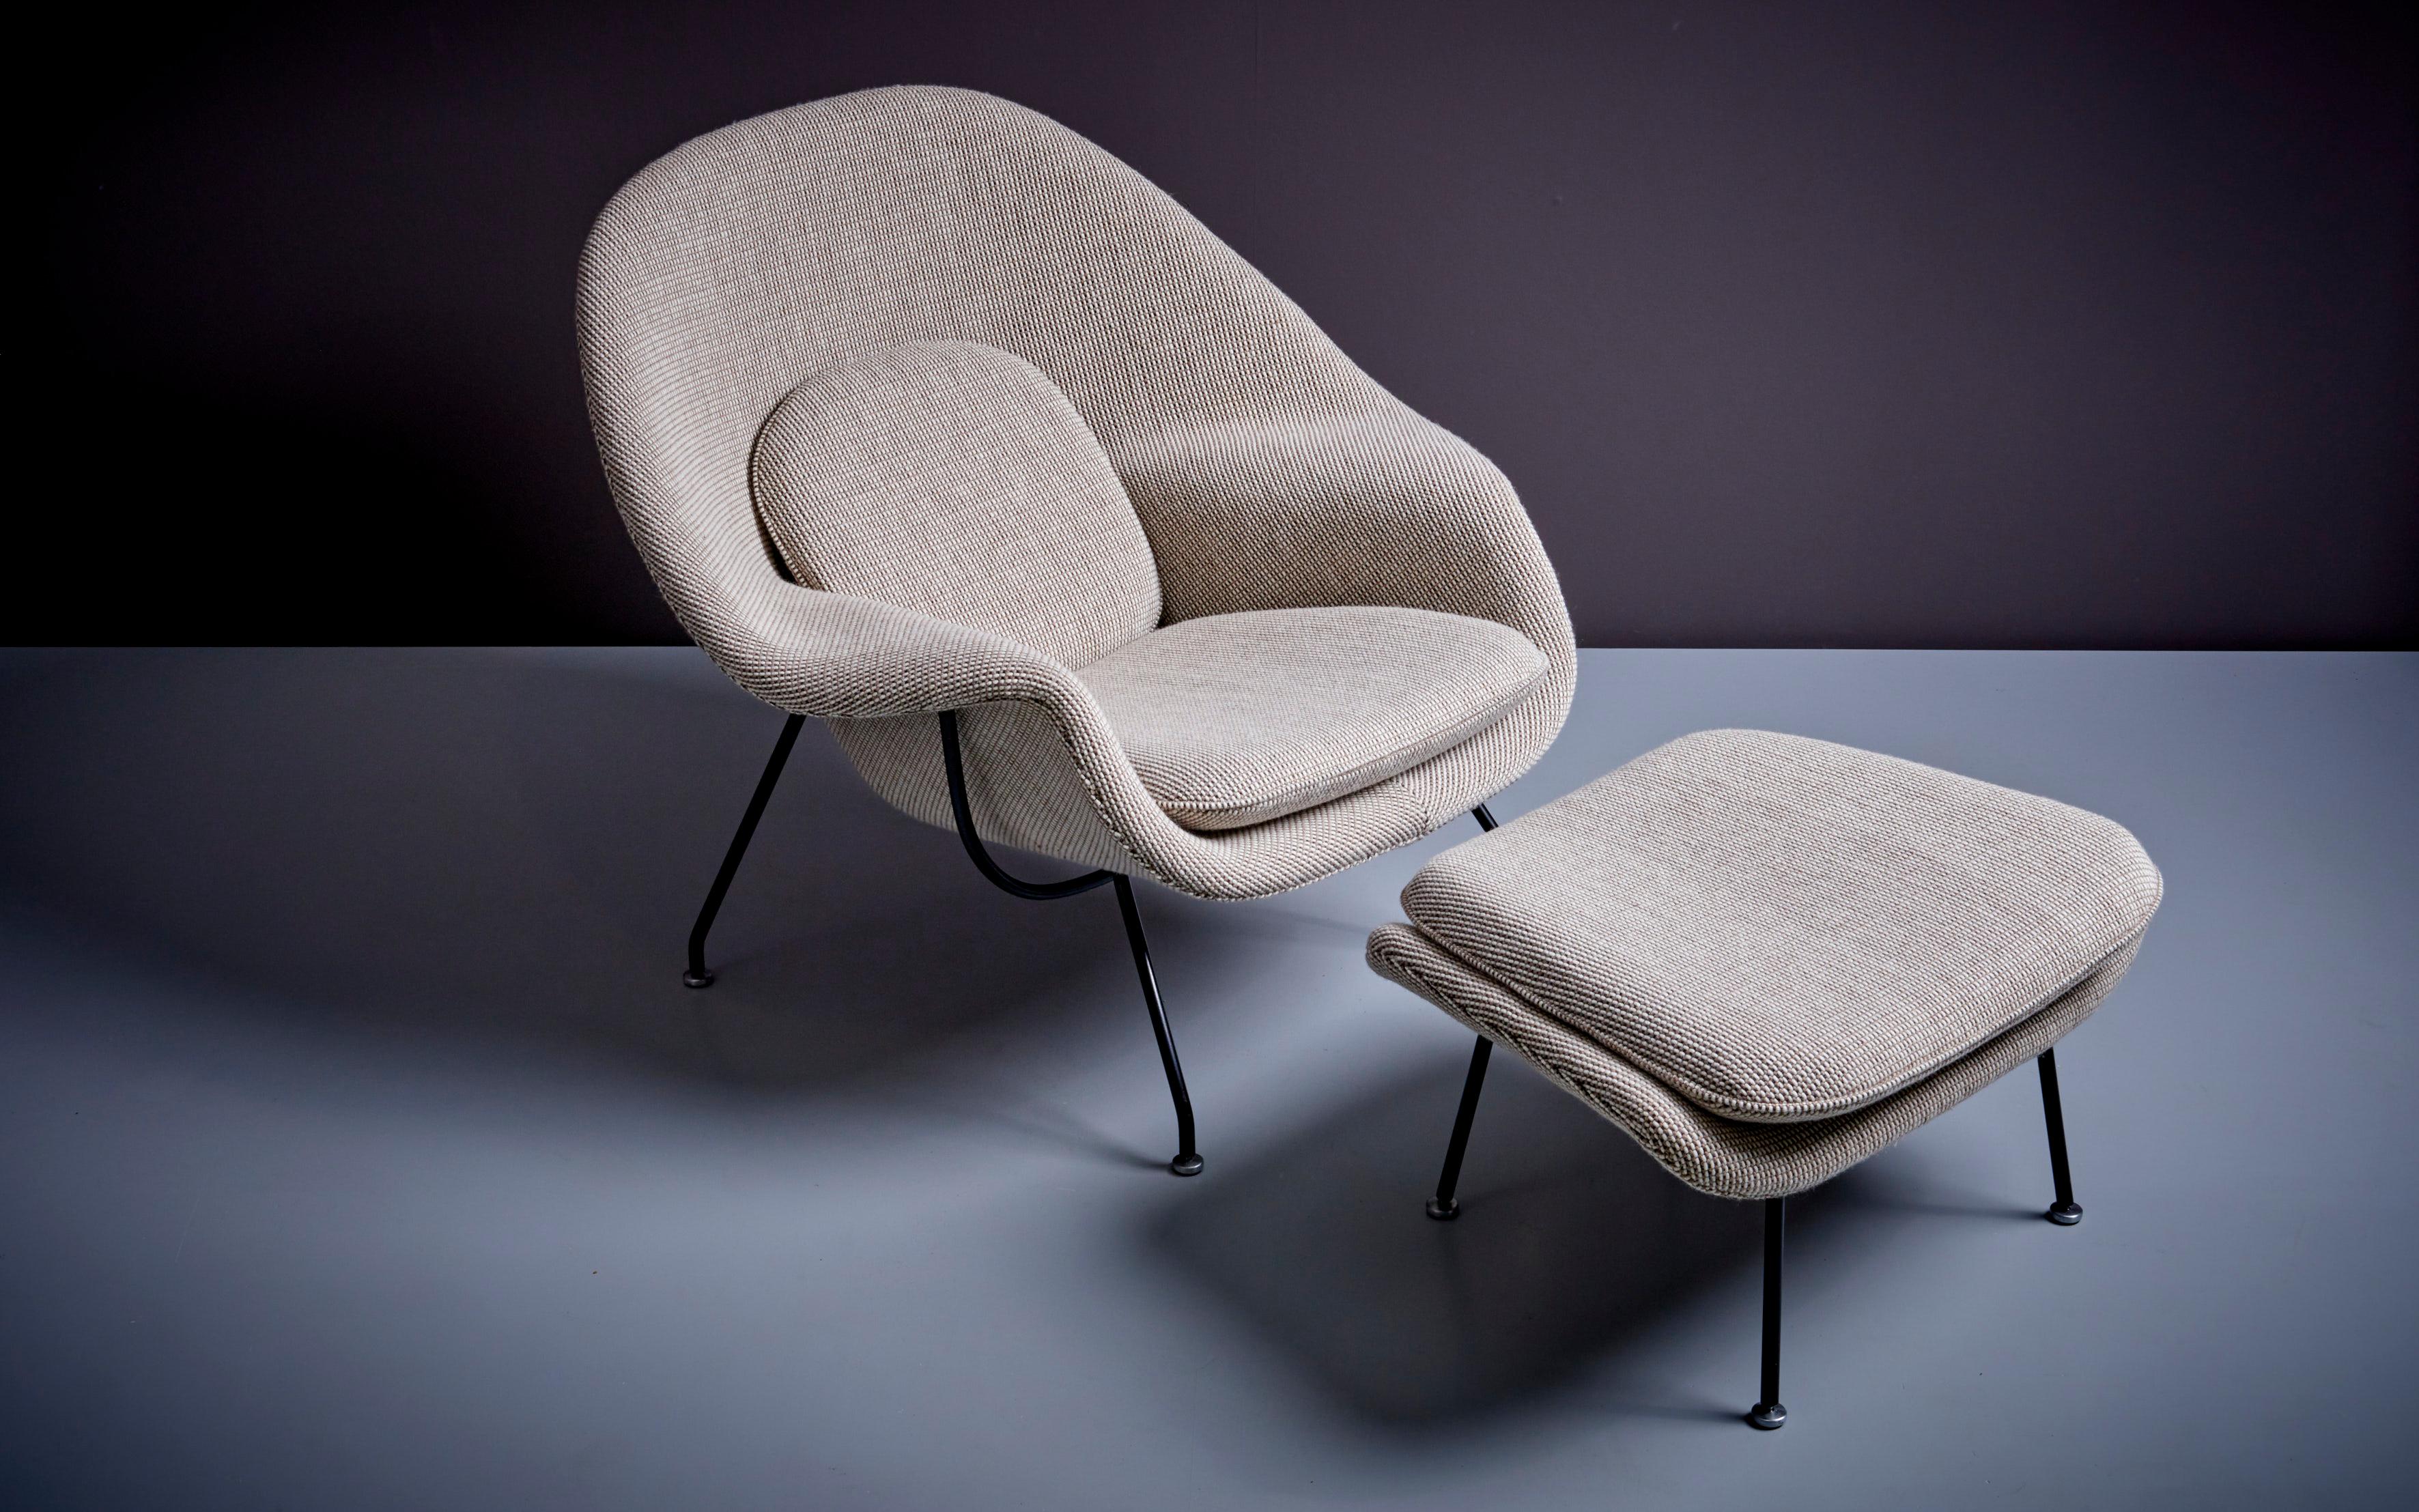 Mid-20th Century Newly upholstered Set of Eero Saarinen Womb Chair and Ottoman for Knoll, USA